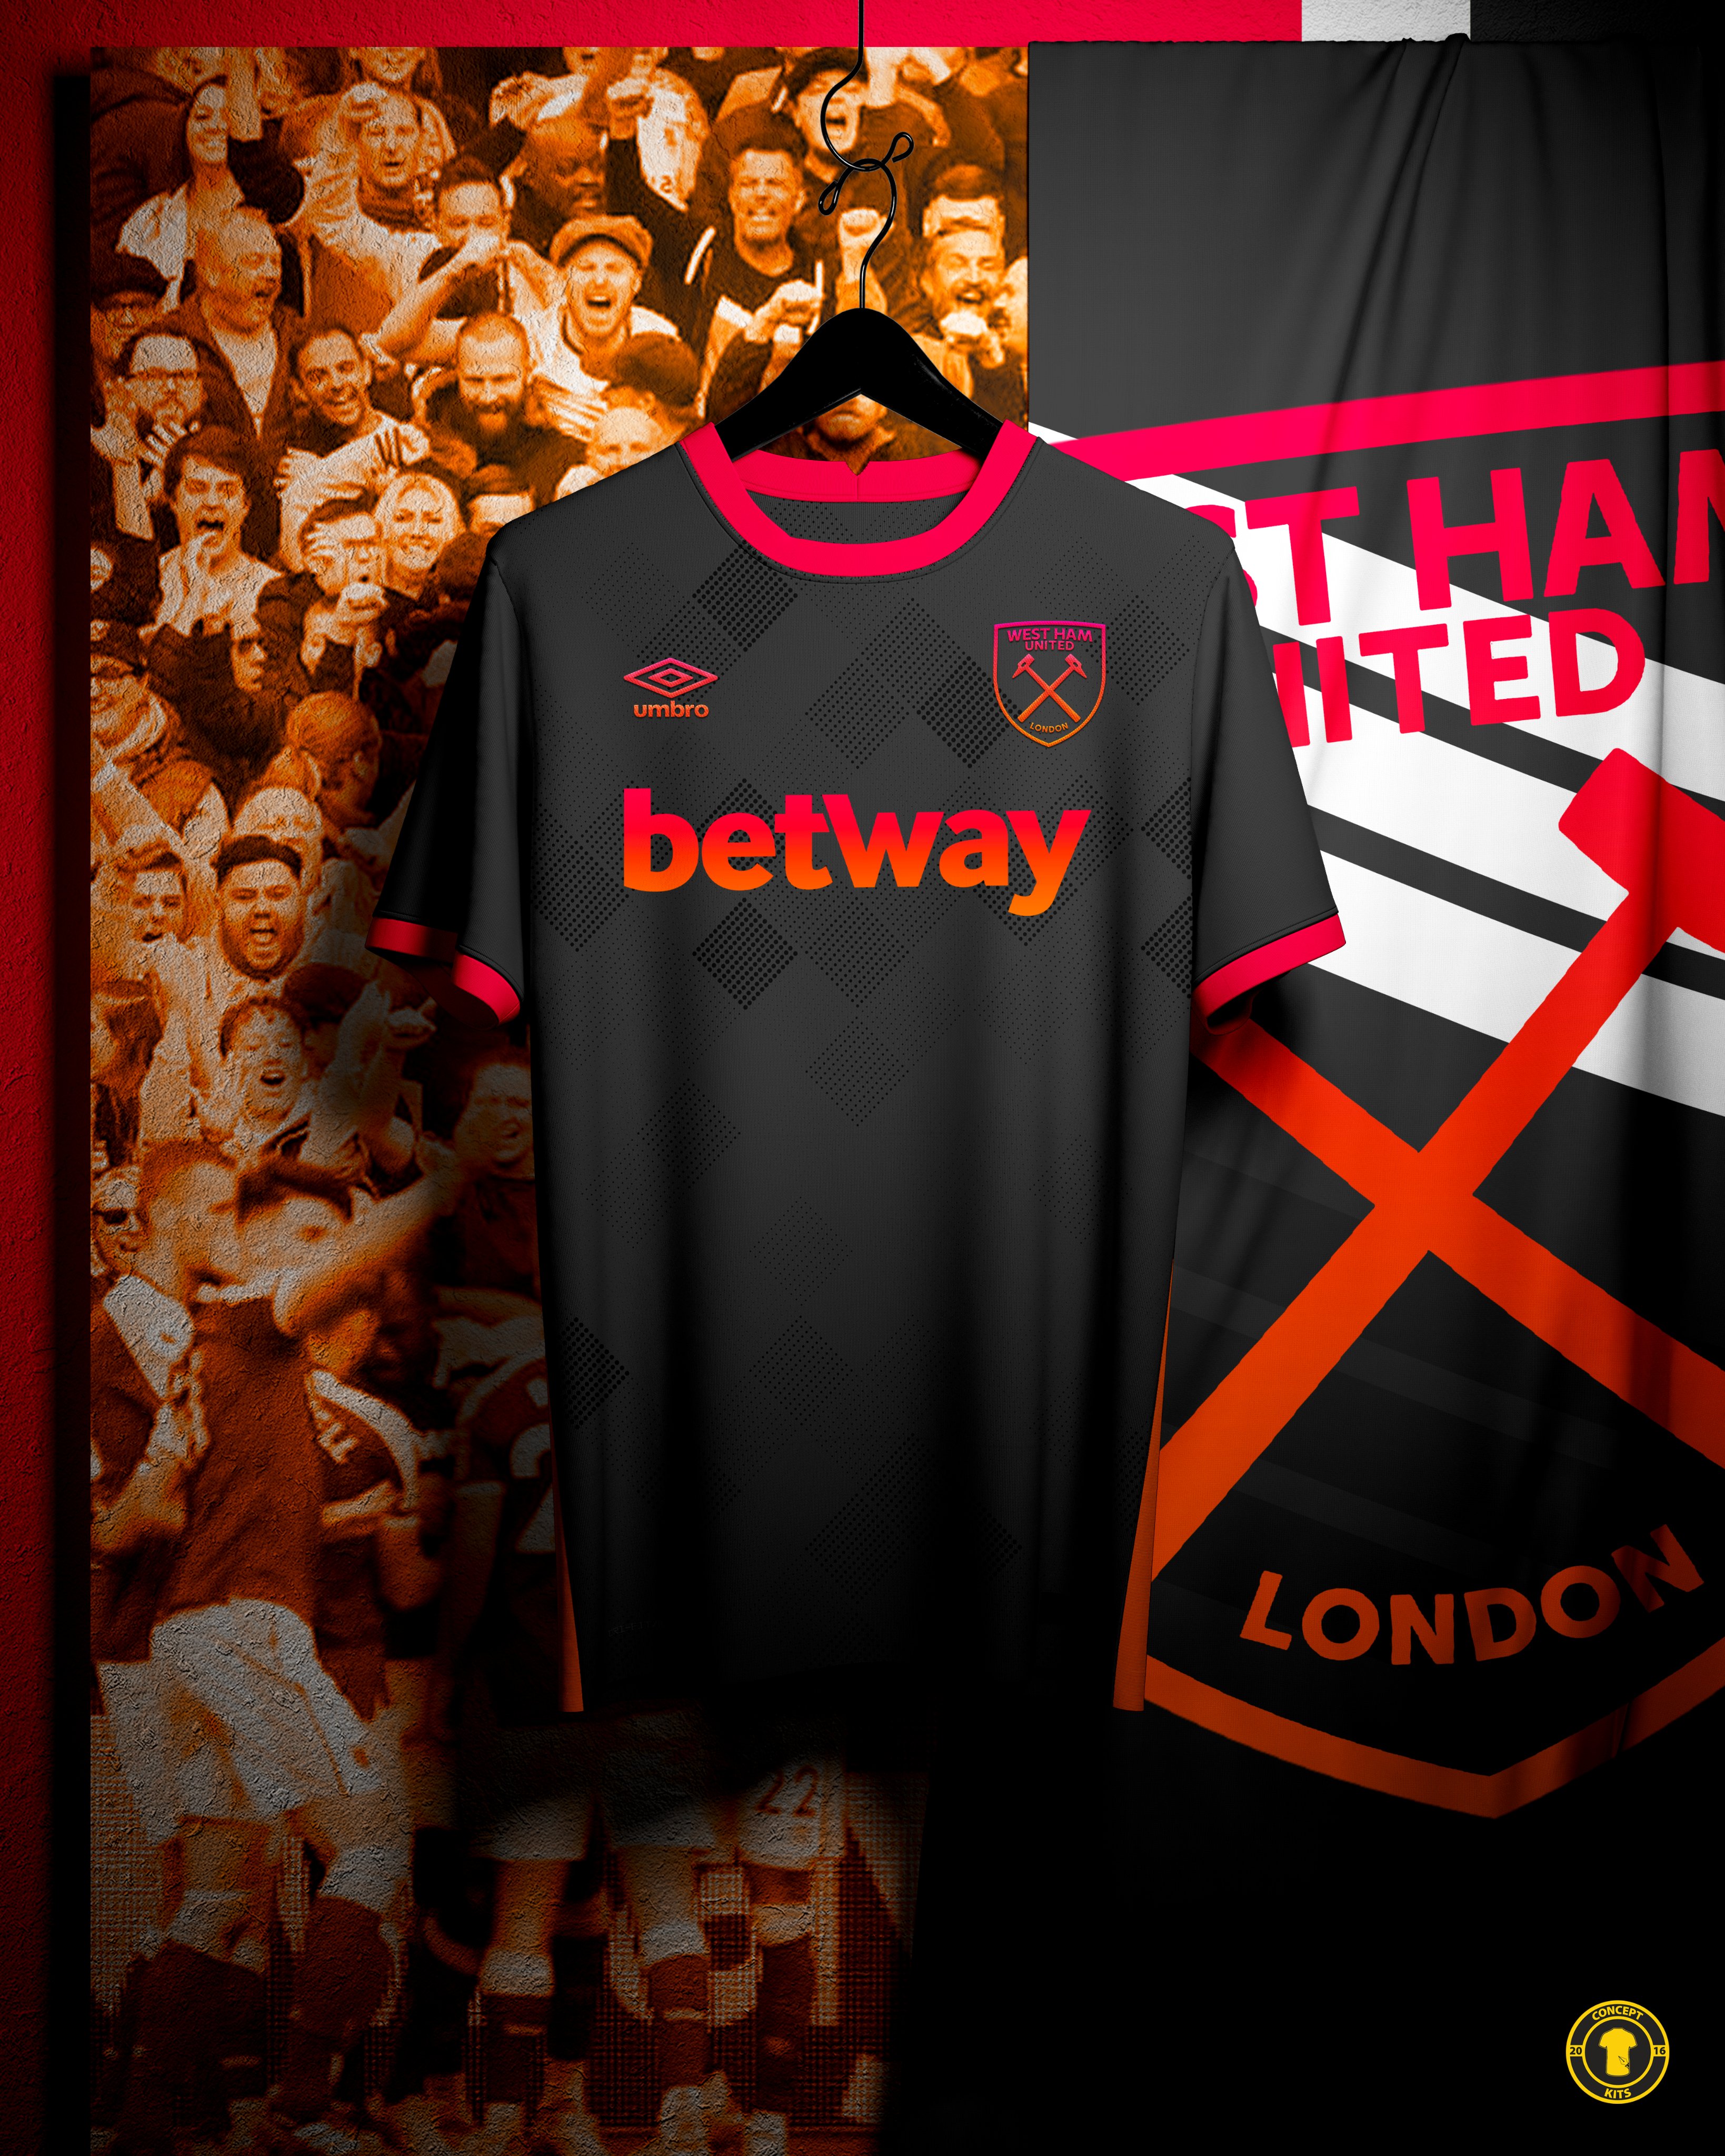 Aggregaat Duplicaat vals Concept Kits on Twitter: "West Ham United Football Club home, away and  third kit concepts for the 2022/23 season. #WHUFC #WestHam #WestHamUnited  #WHU #COYI #Irons #Umbro #WestHamUtd #Hammers https://t.co/5CJYt2hMH5" /  Twitter